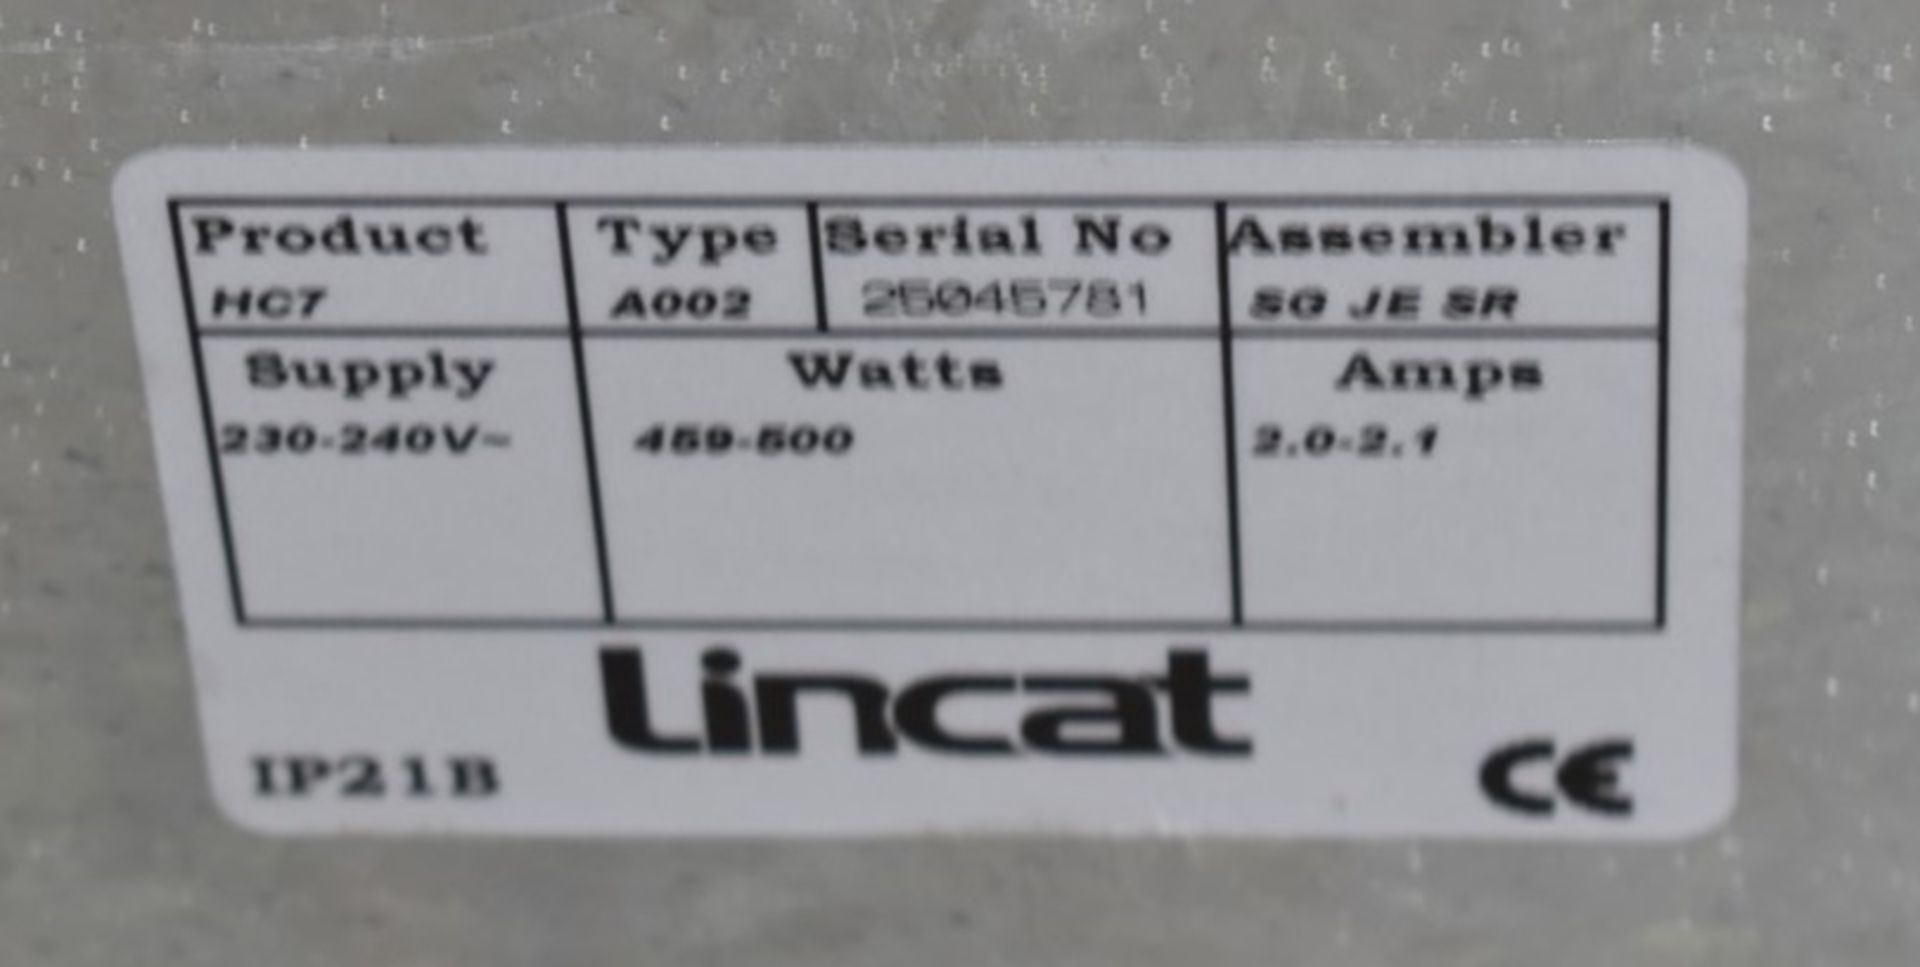 1 x Lincat HC7 Silverlink Stainless Steel Heated Base Pedestal With Doors For Lincat Silverlink - Image 6 of 8